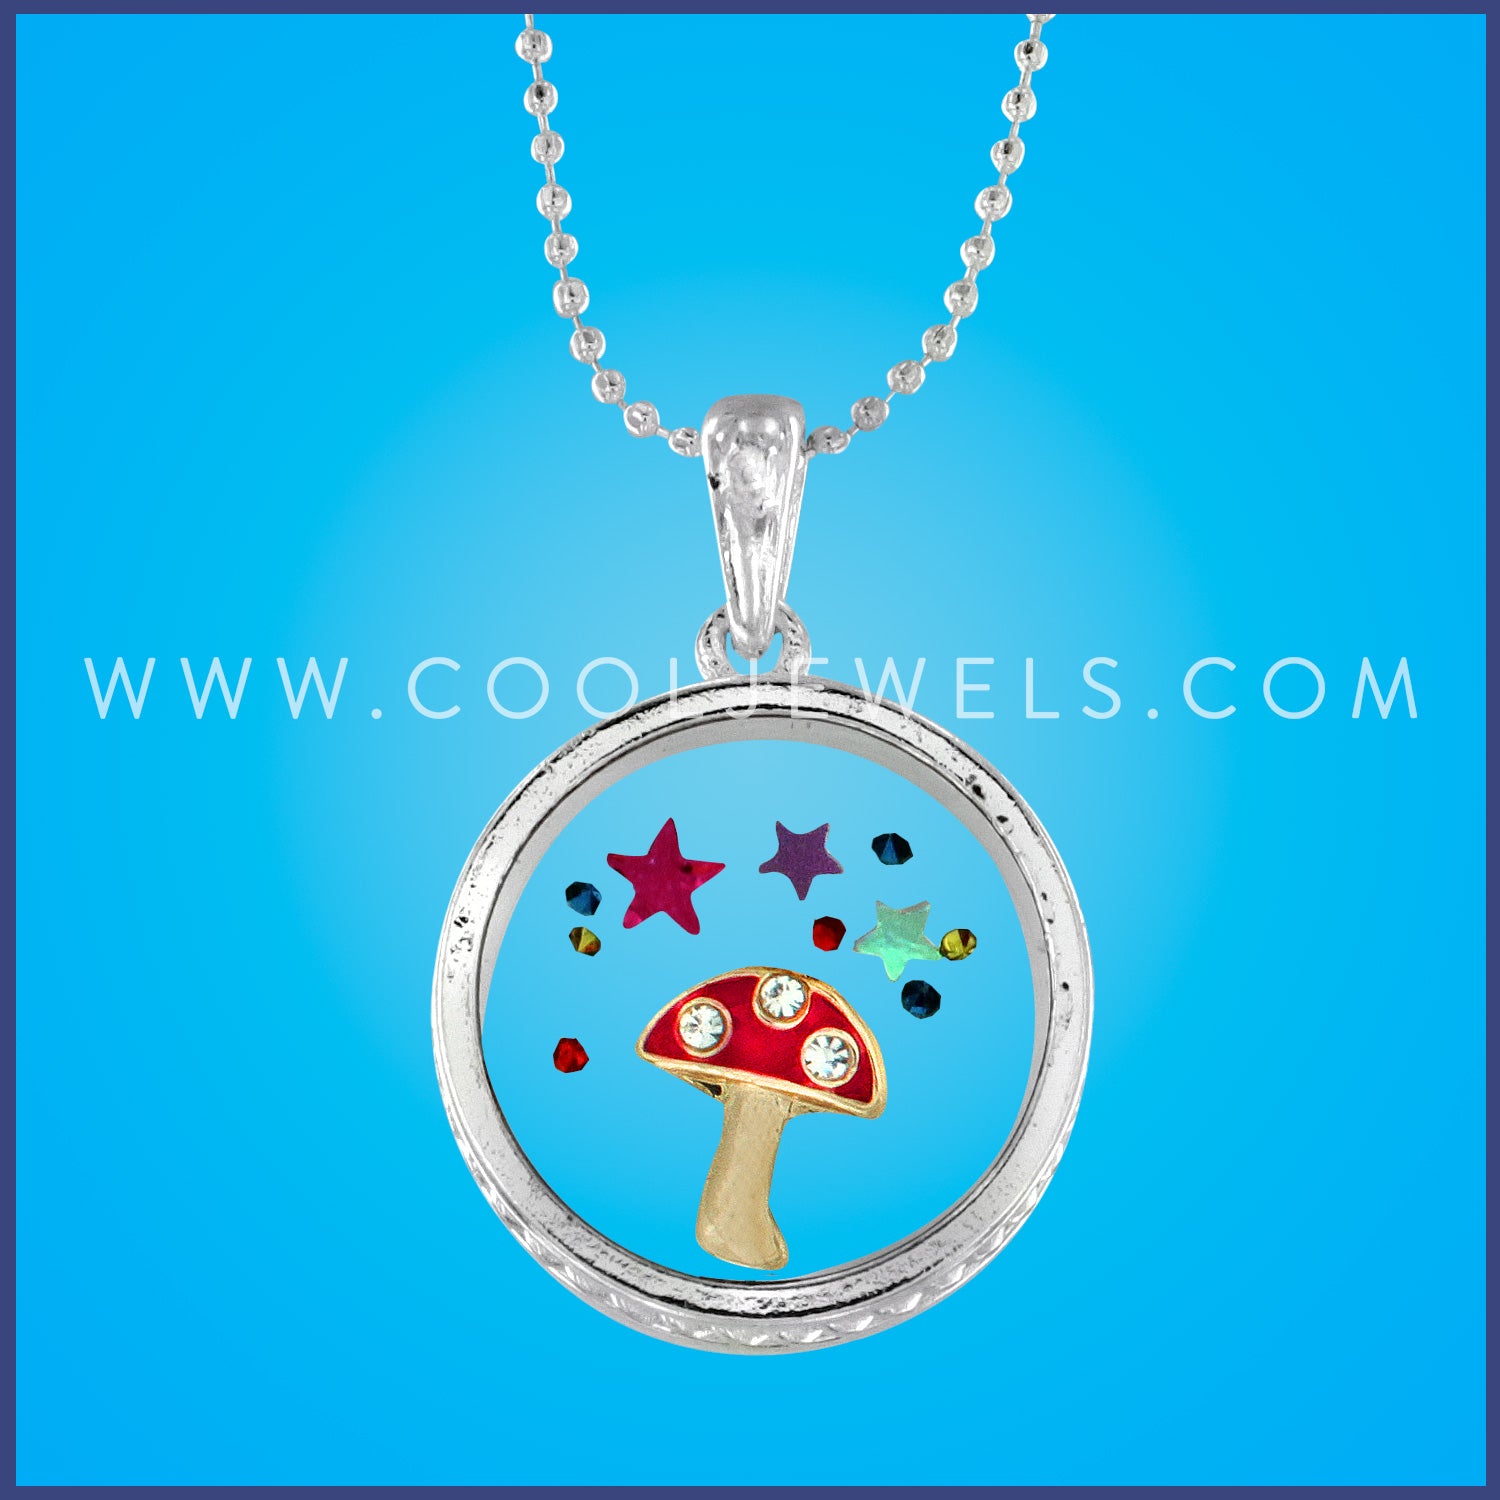 SILVER BALL CHAIN NECKLACE WITH ROUND PENDANT WITH MUSHROOM & STARS